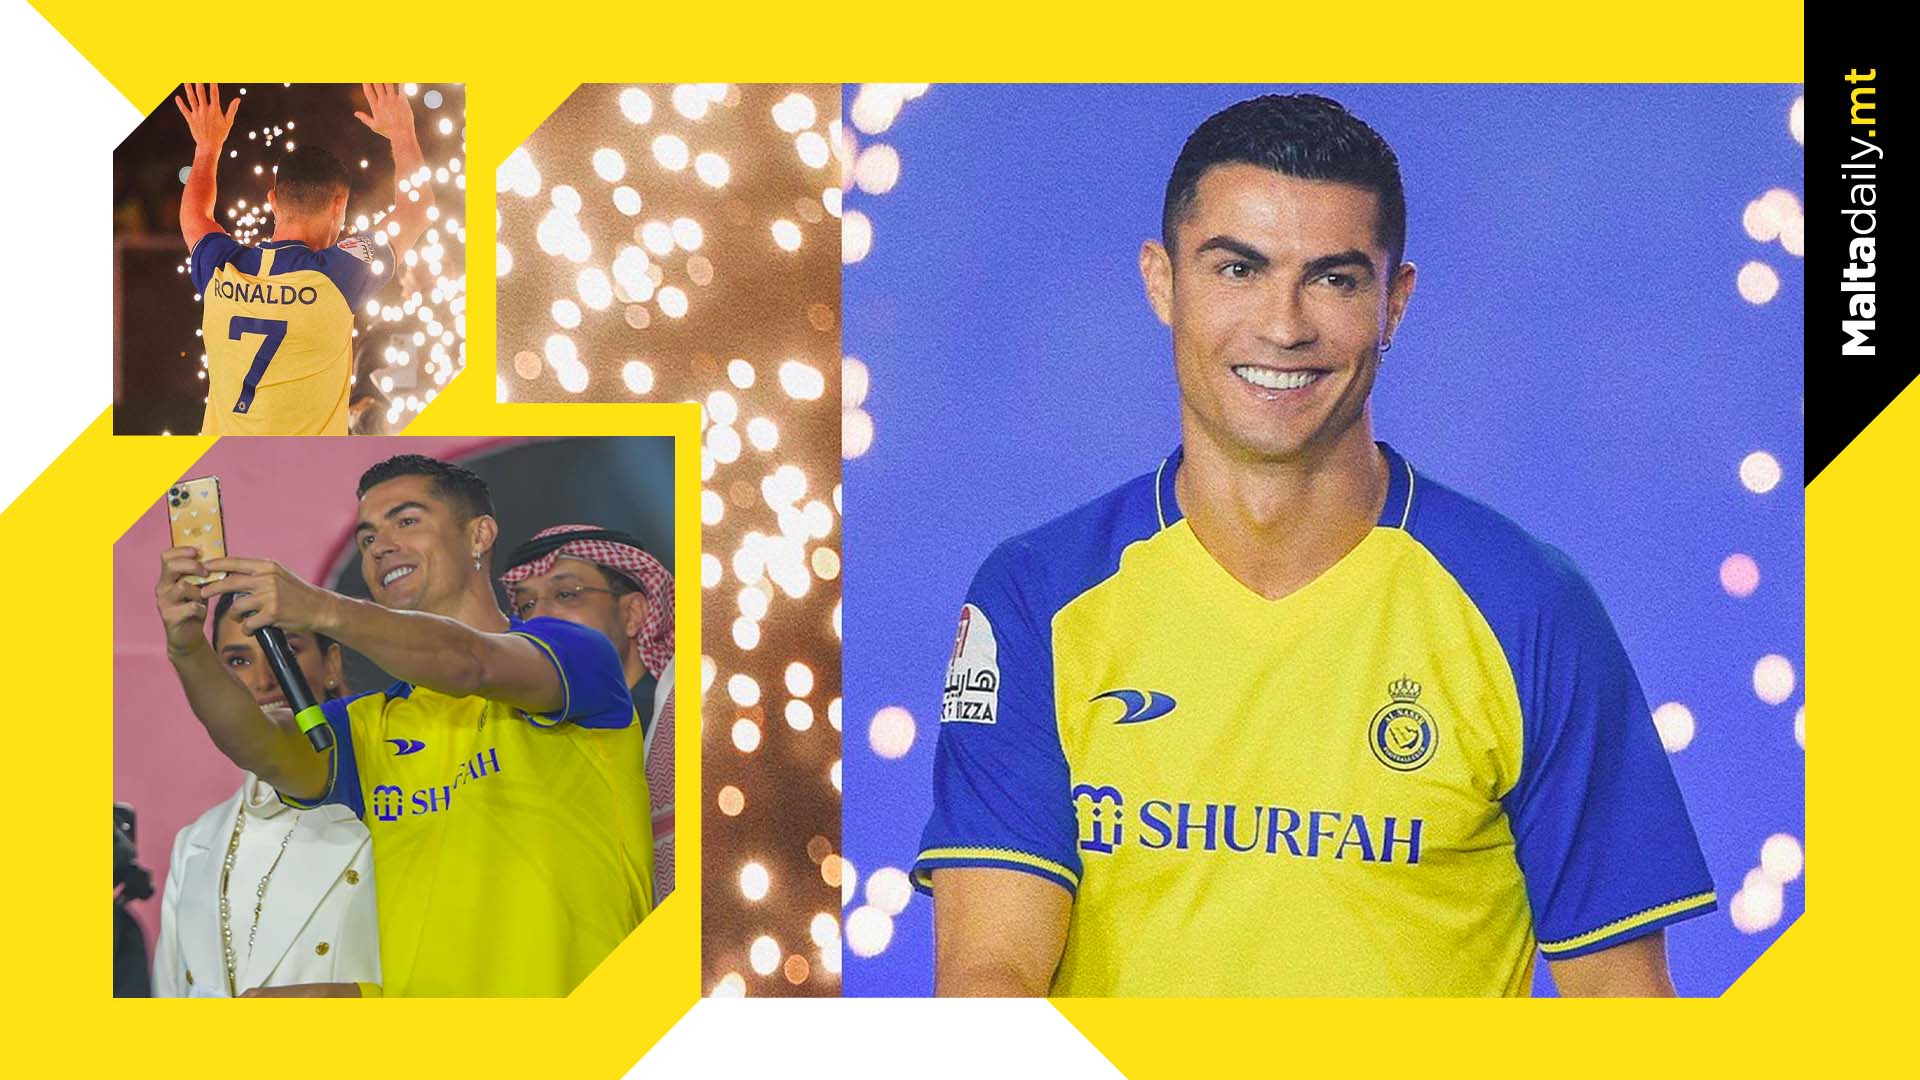 Many opportunities to join European clubs before Al-Nassr says Ronaldo